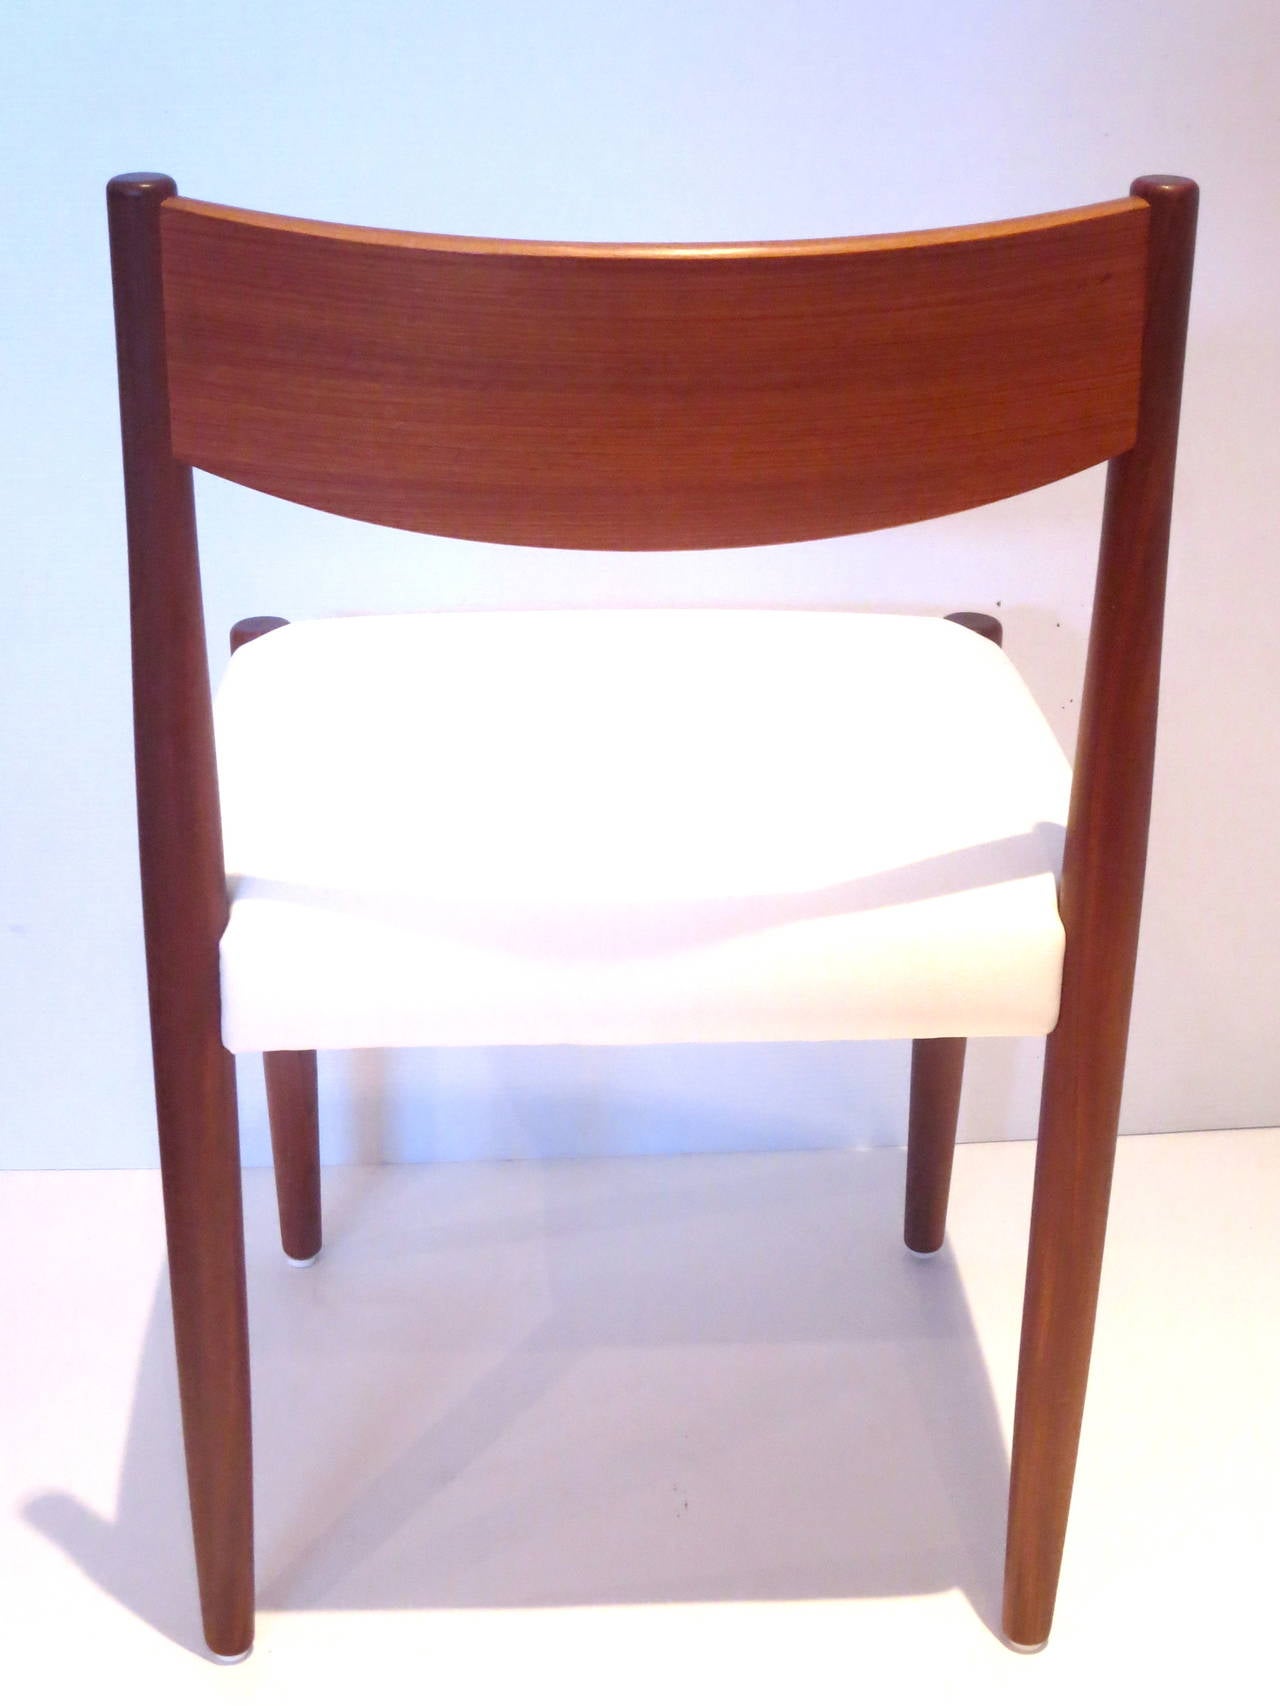 Scandinavian Modern Nice set of 4 Dining chairs design by Poul Volther for Frem Rojle in teak